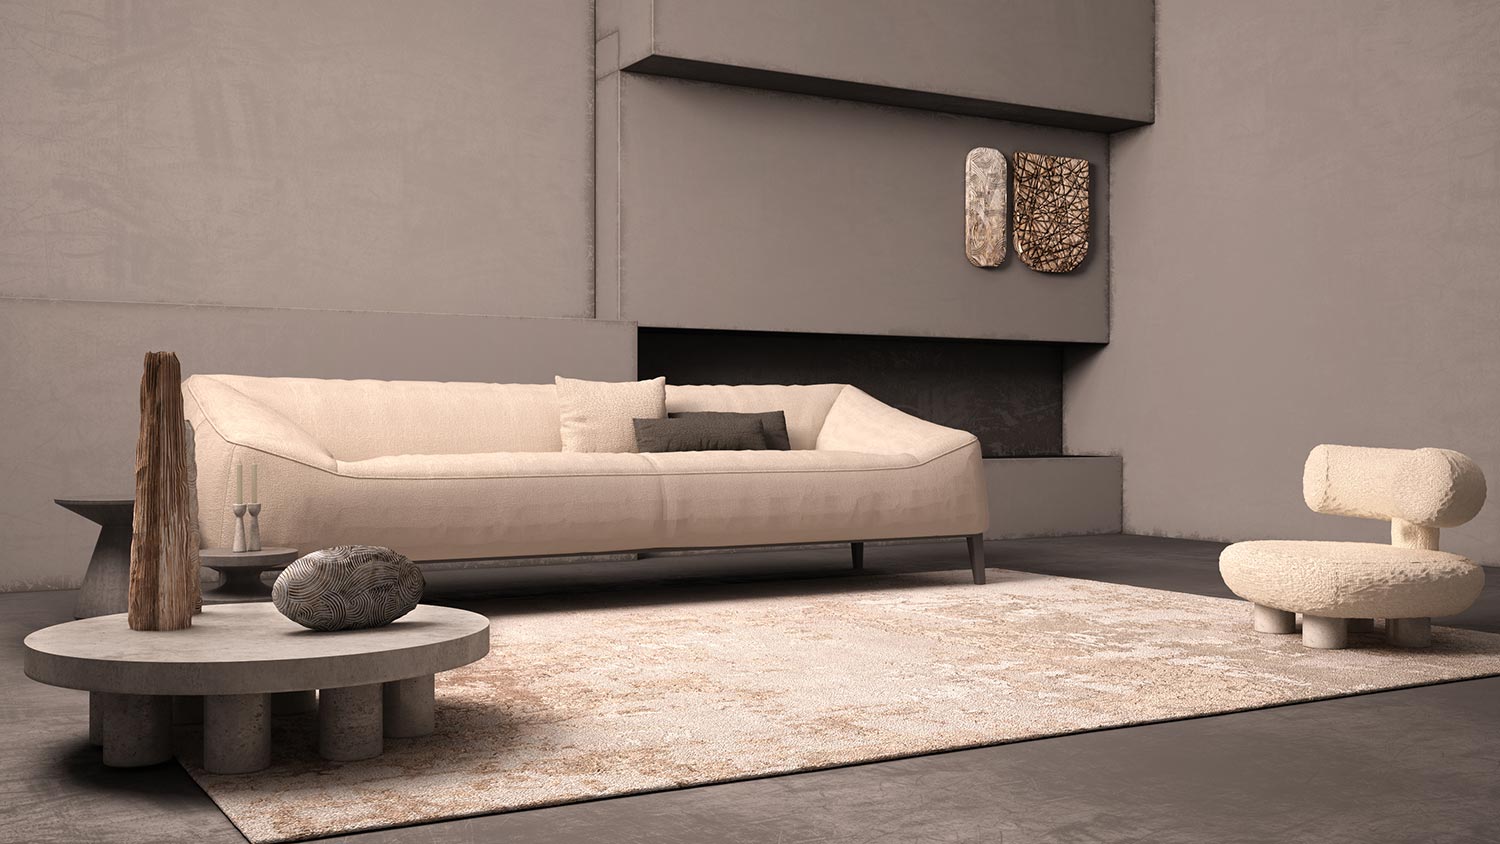 Elegant grunge living room with plaster walls and floor, fireplace